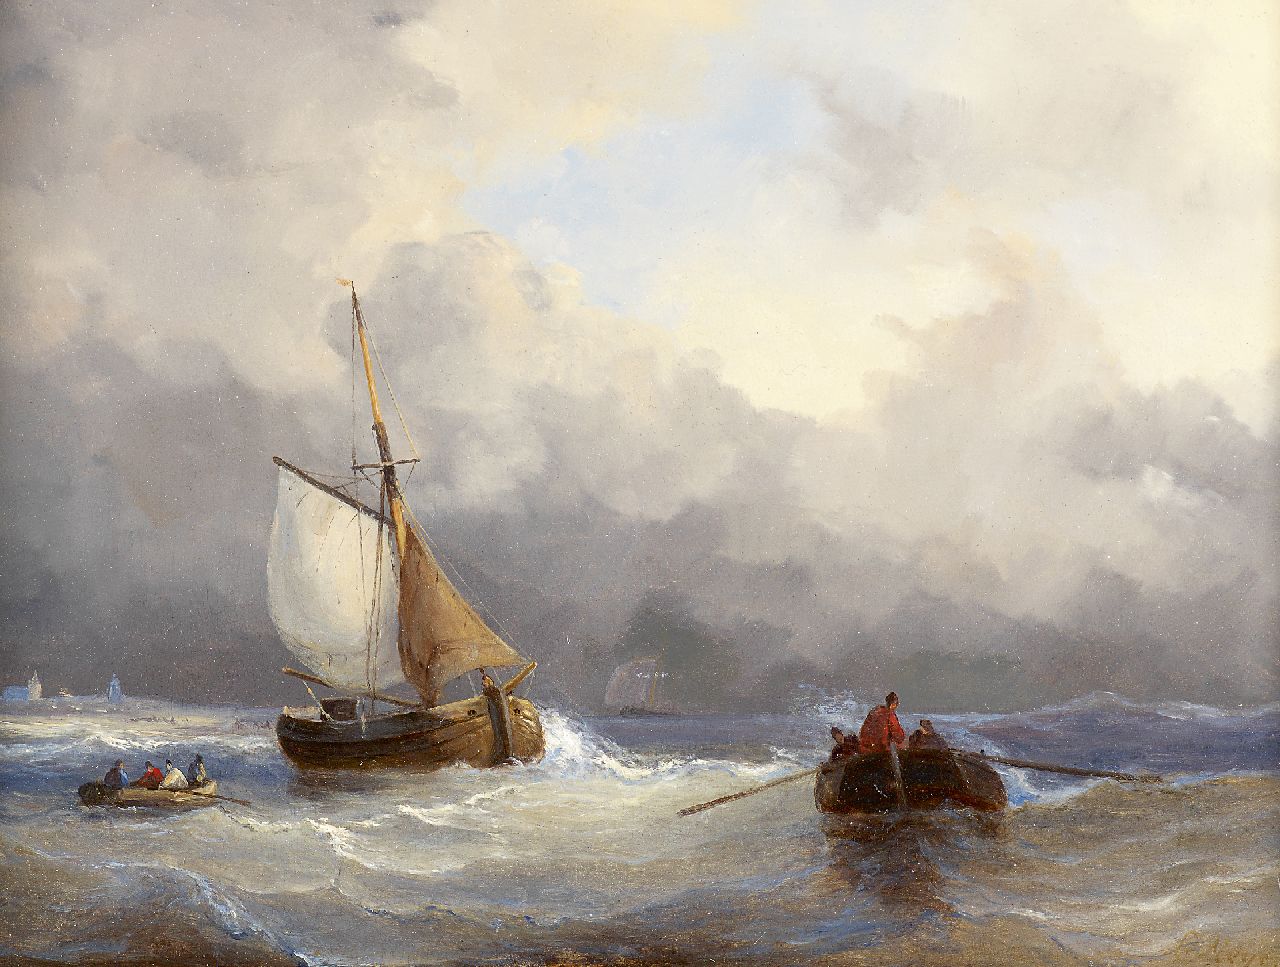 Meijer J.H.L.  | Johan Hendrik 'Louis' Meijer | Paintings offered for sale | Fishing boats at sea, oil on panel 22.8 x 31.0 cm, signed l.r.